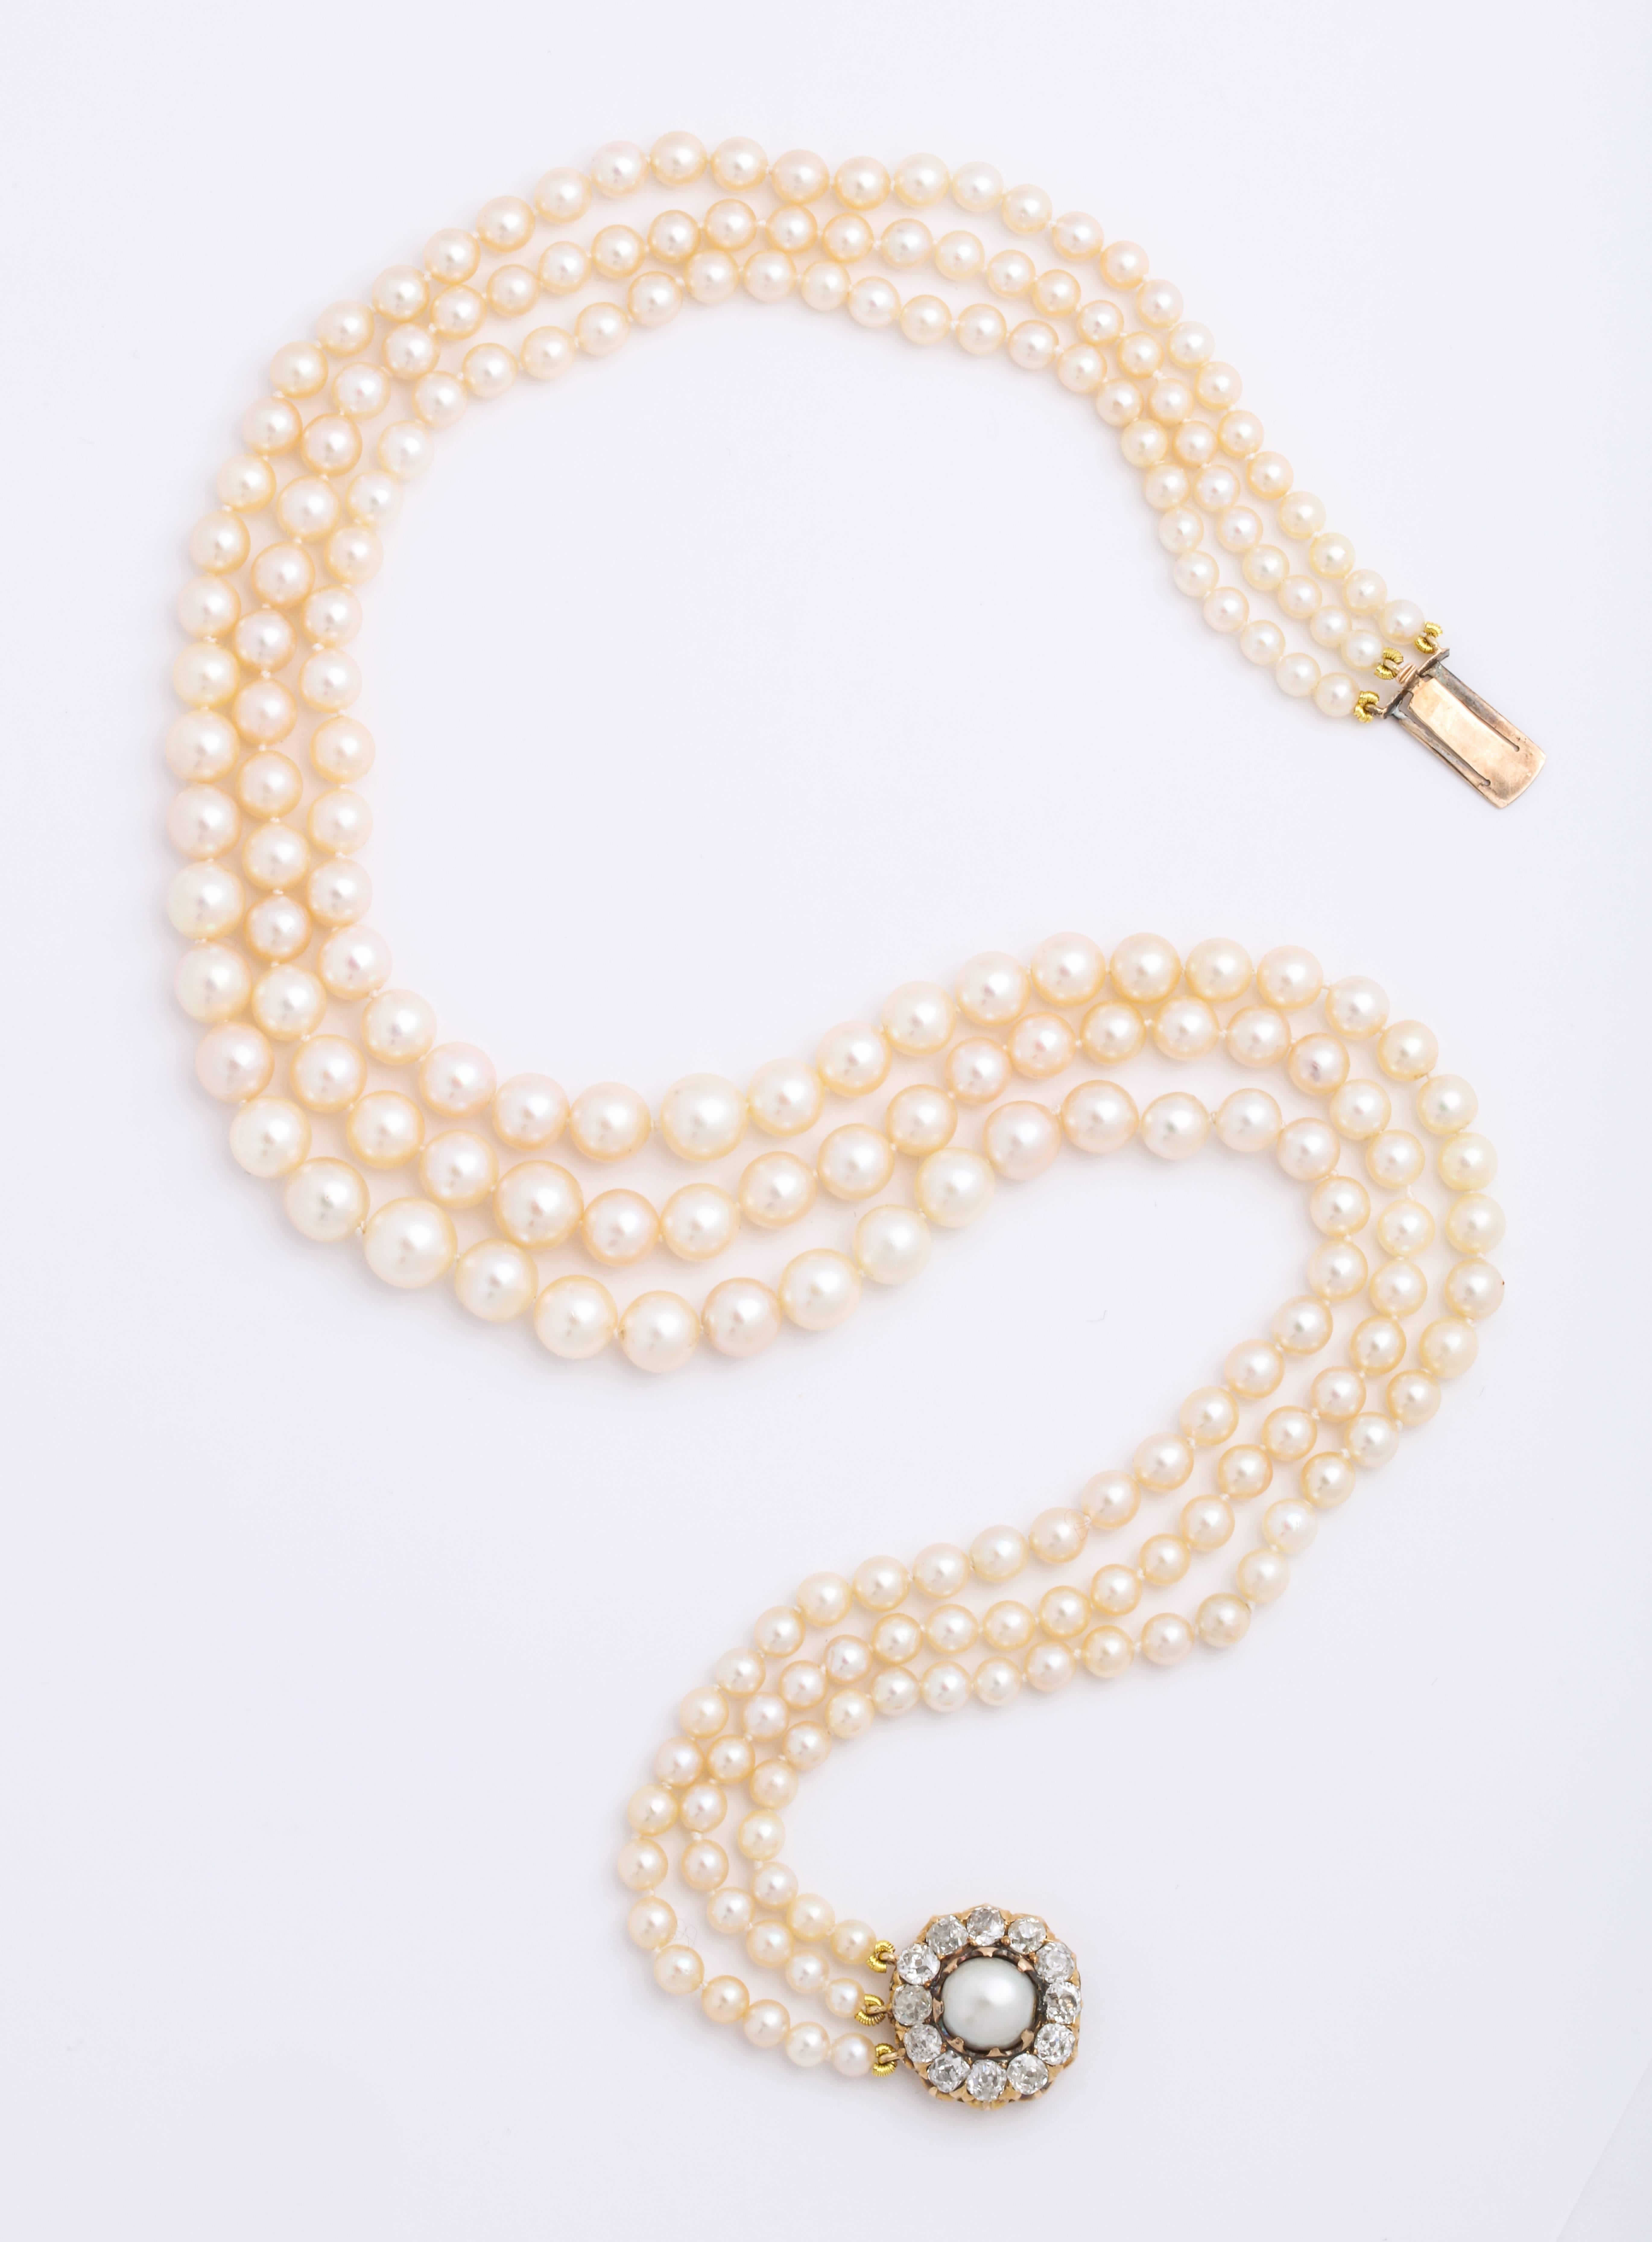 Victorian Cultured Pearl Necklace with Antique Diamond Clasp